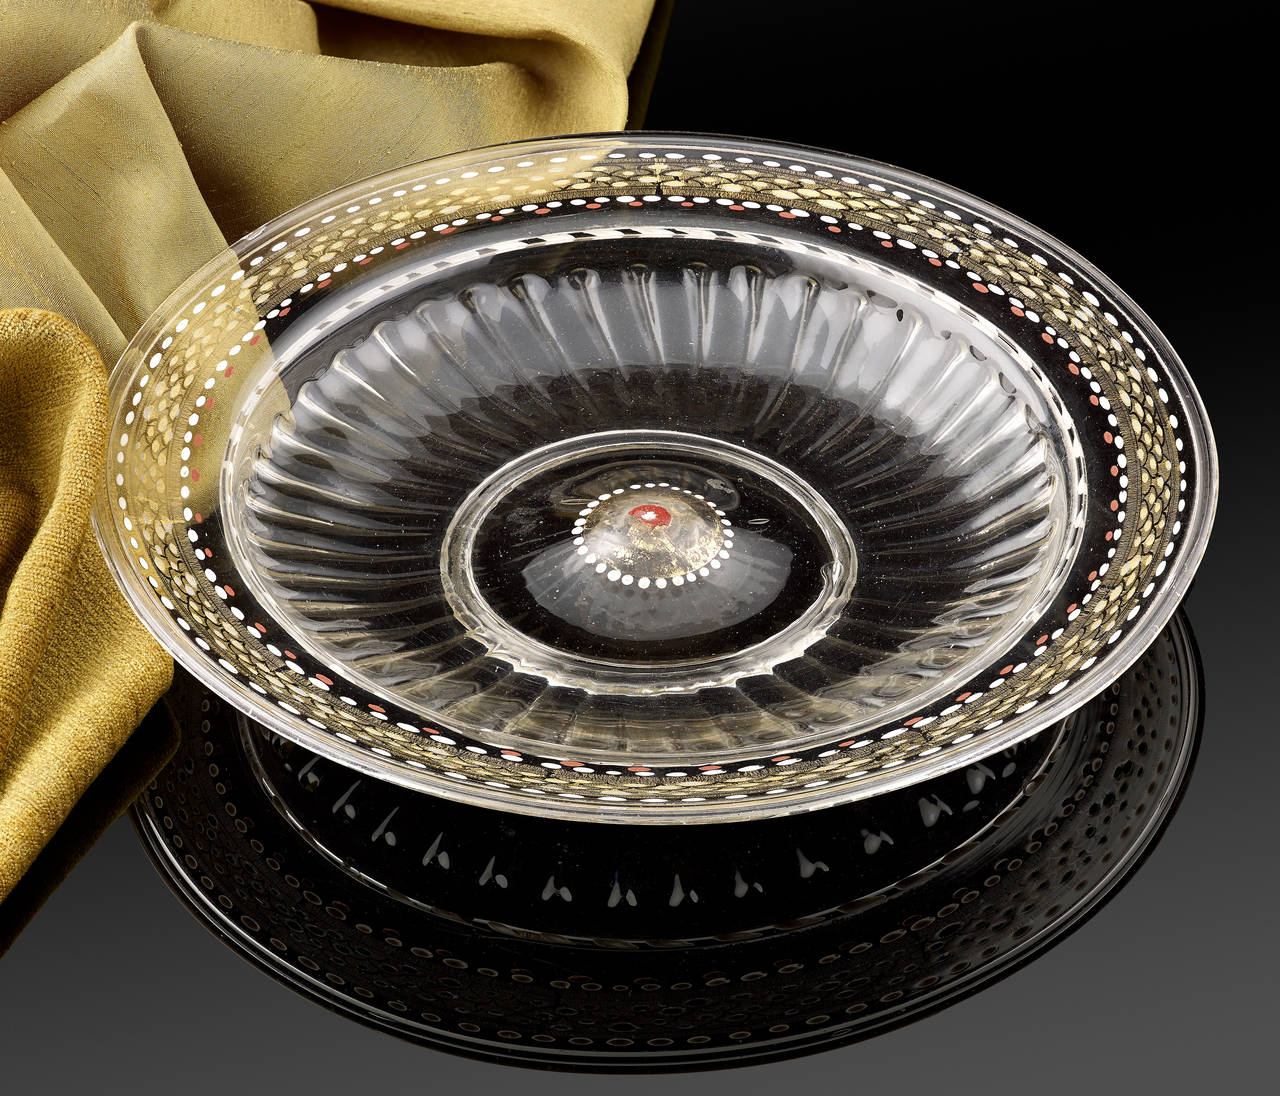 A Very Rare Venetian low footed Glass Bowl, C.1500 - 1525; The shallow tray of the bowl moulded with a series of ribs radiating from the raised centre; the broad rim decorated with an intricate pattern of gilded scales embellished with white, red